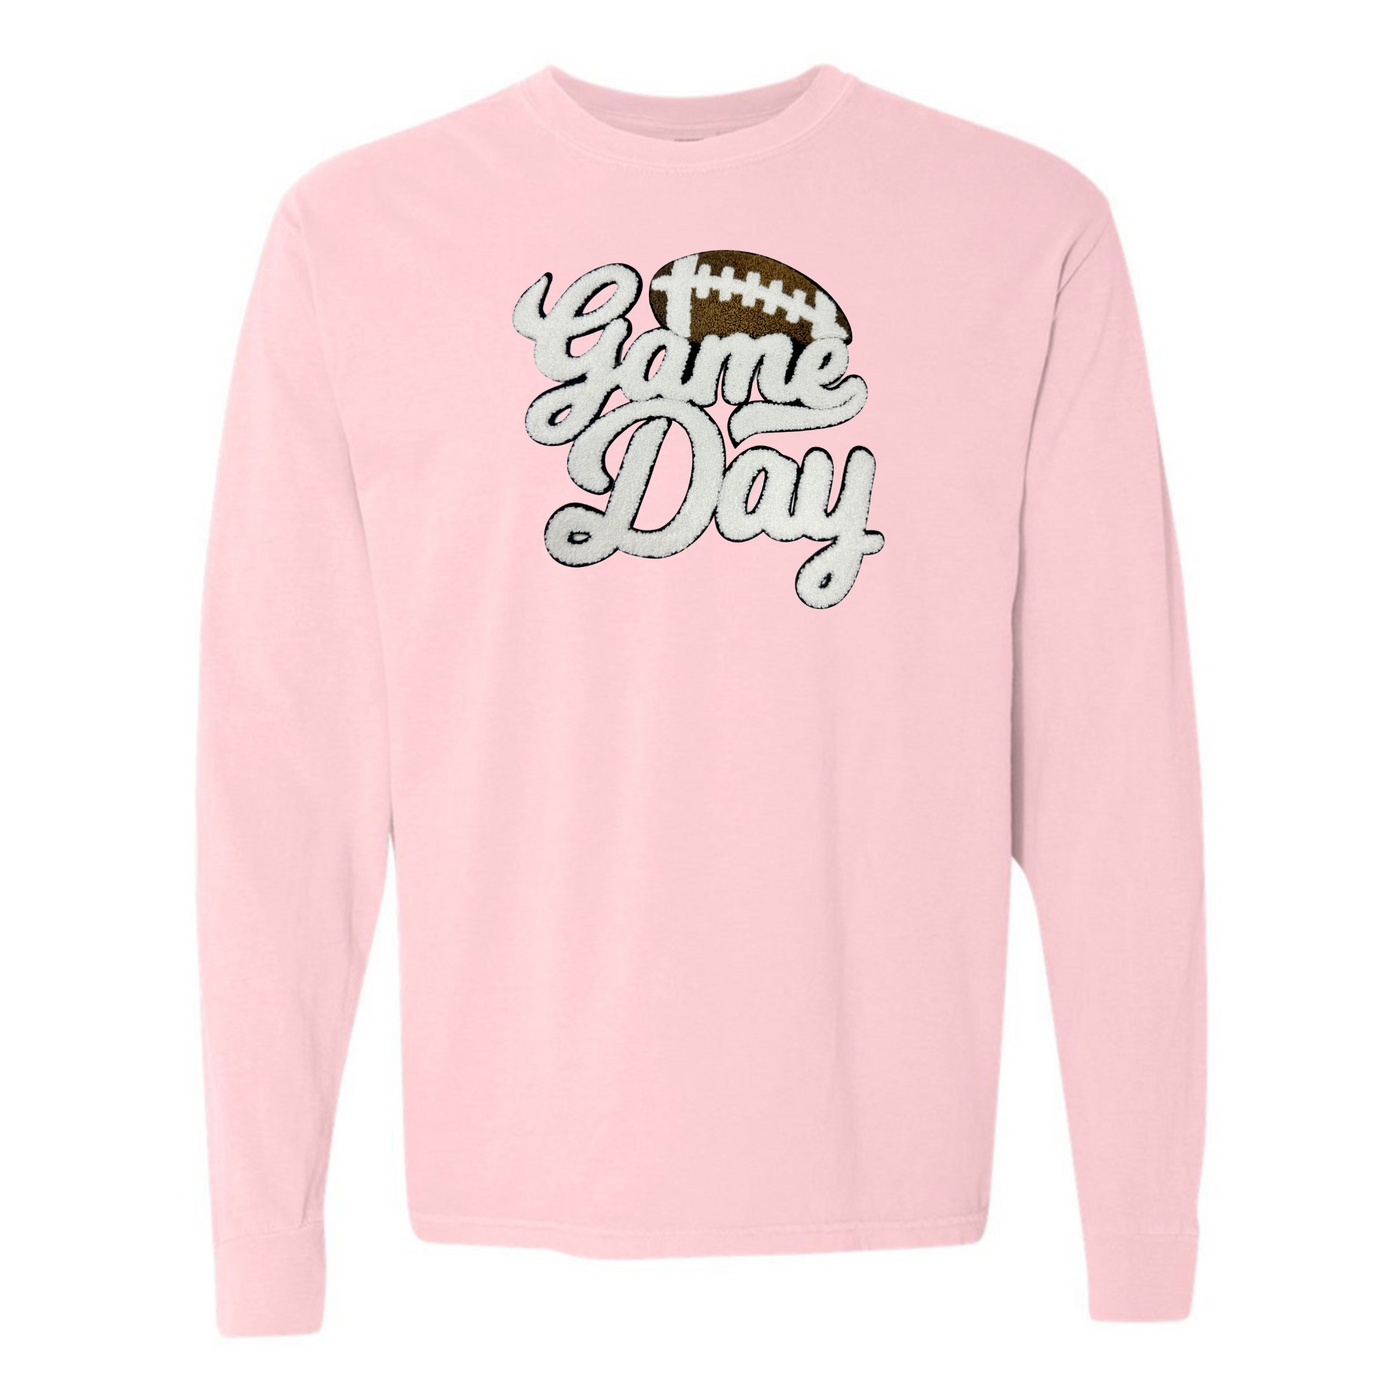 Football 'Game Day' Letter Patch Long Sleeve T-Shirt